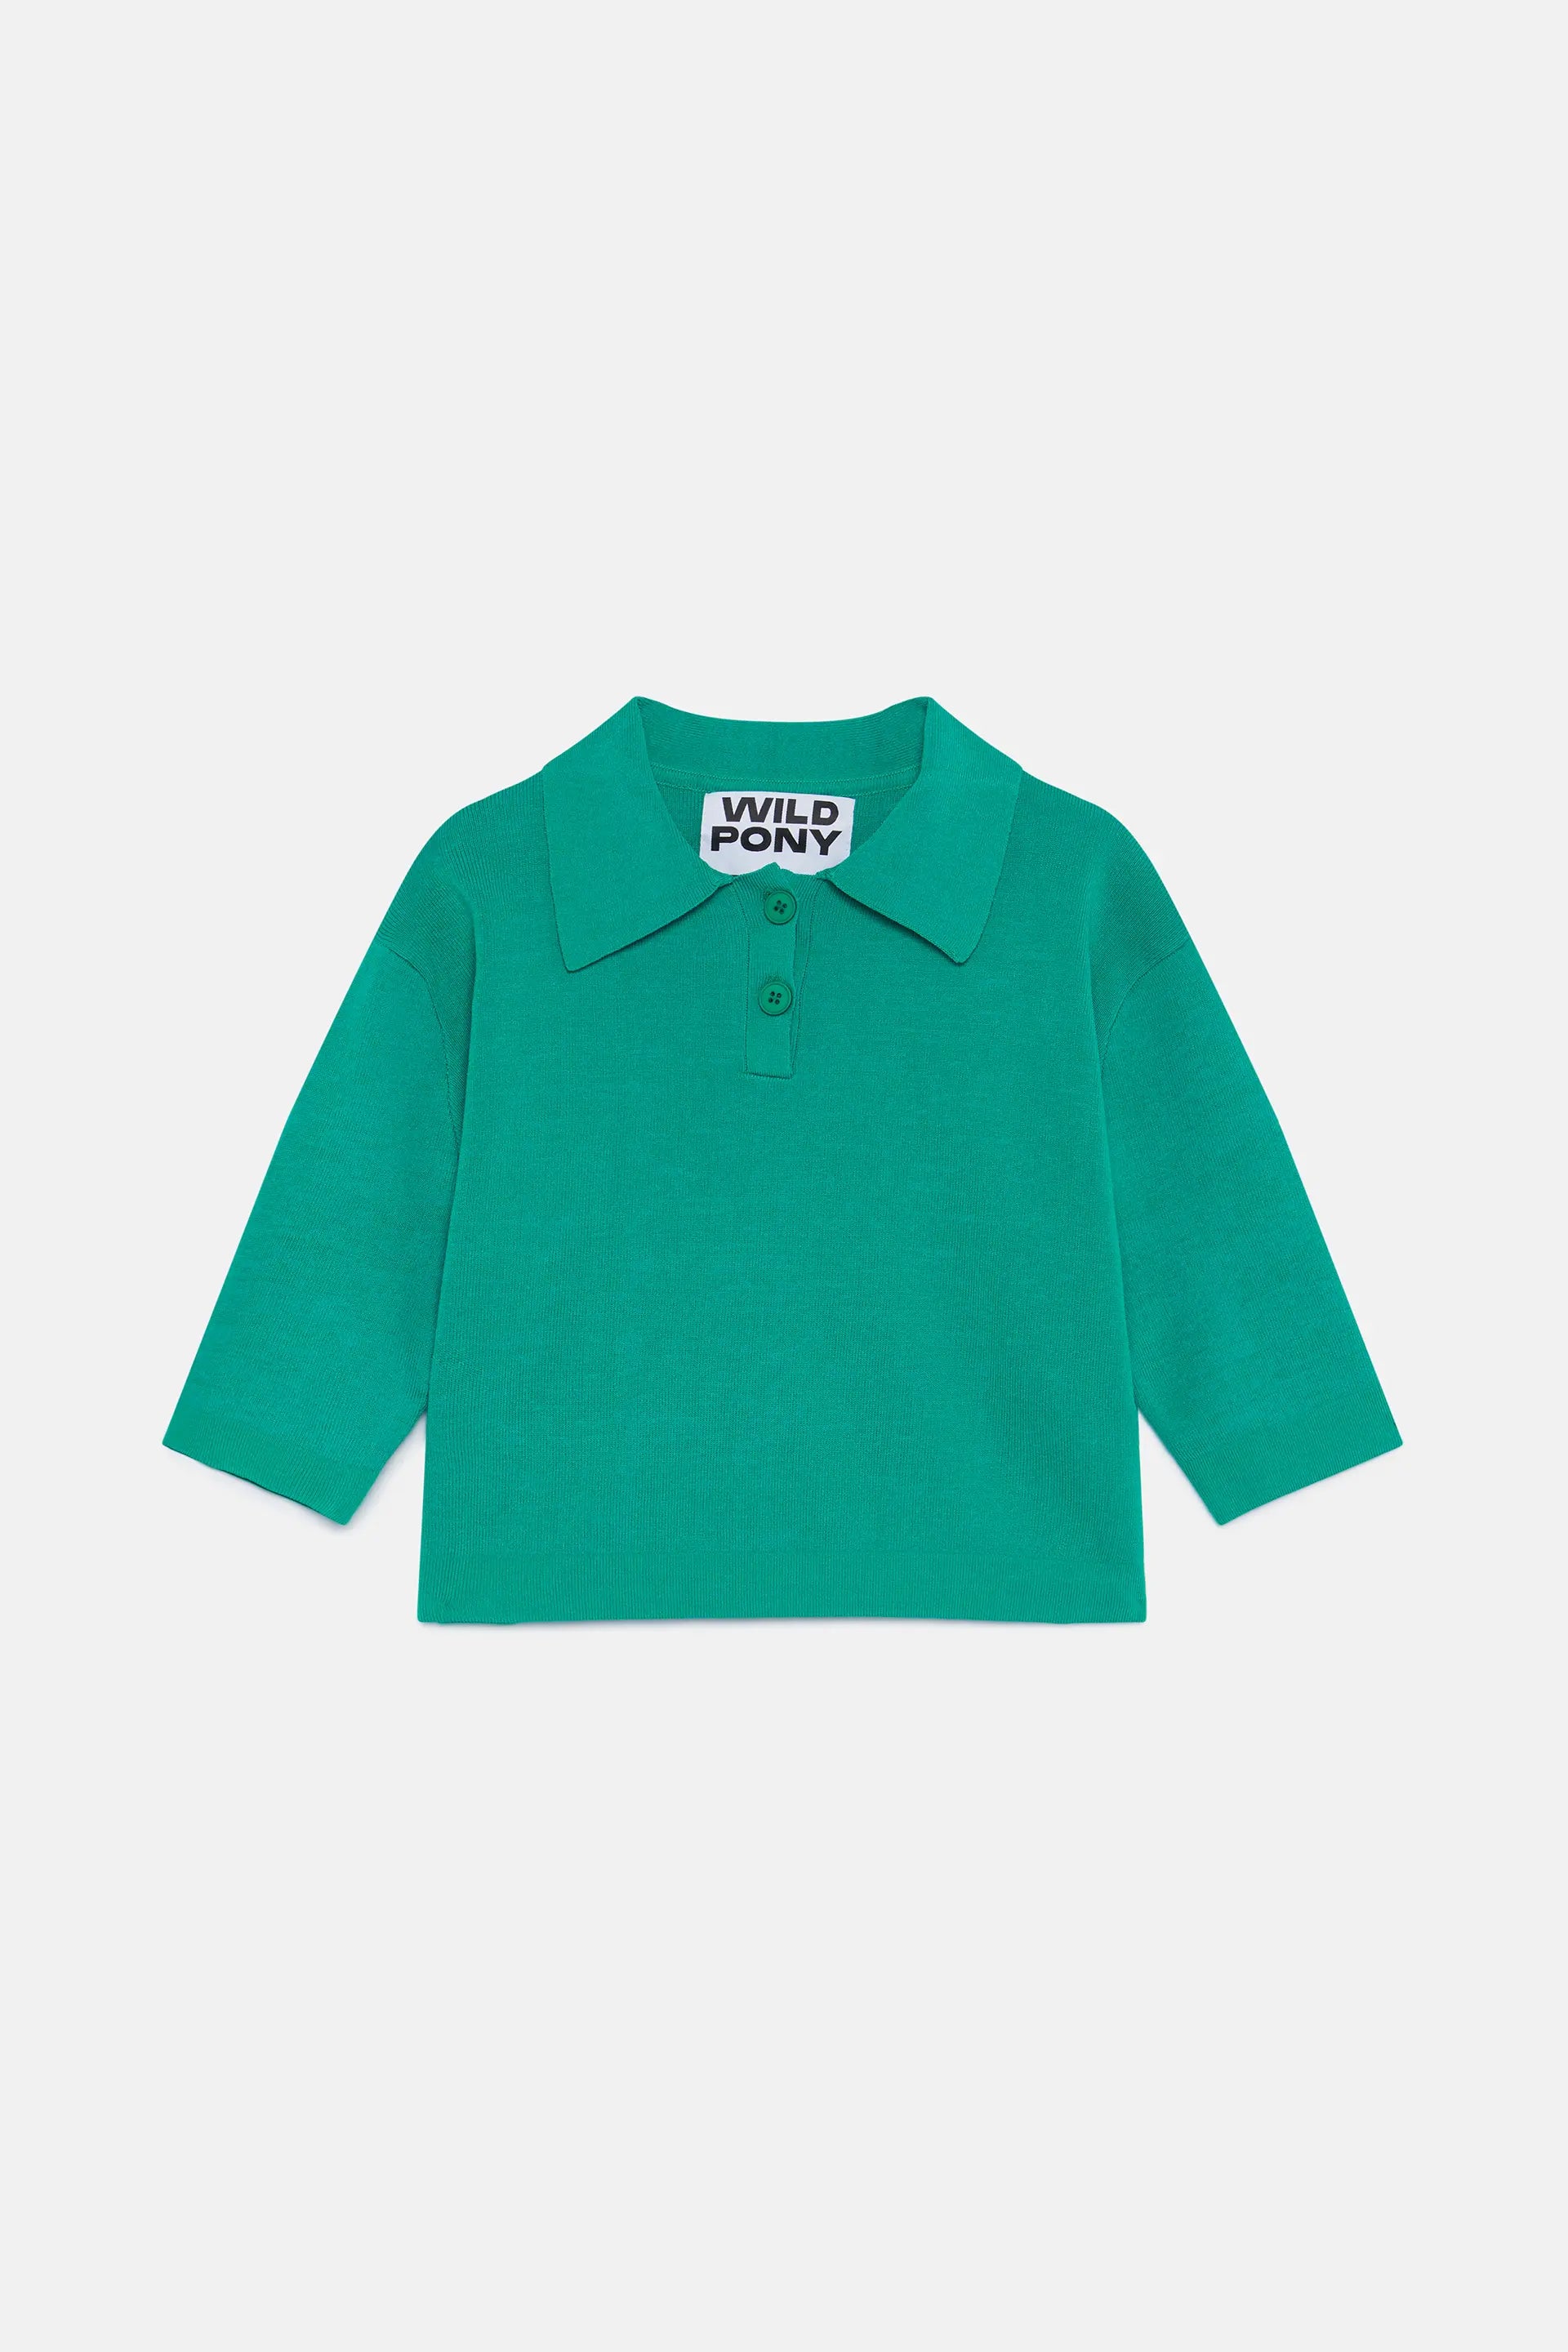 Wild Pony Green polo neck knitted sweater